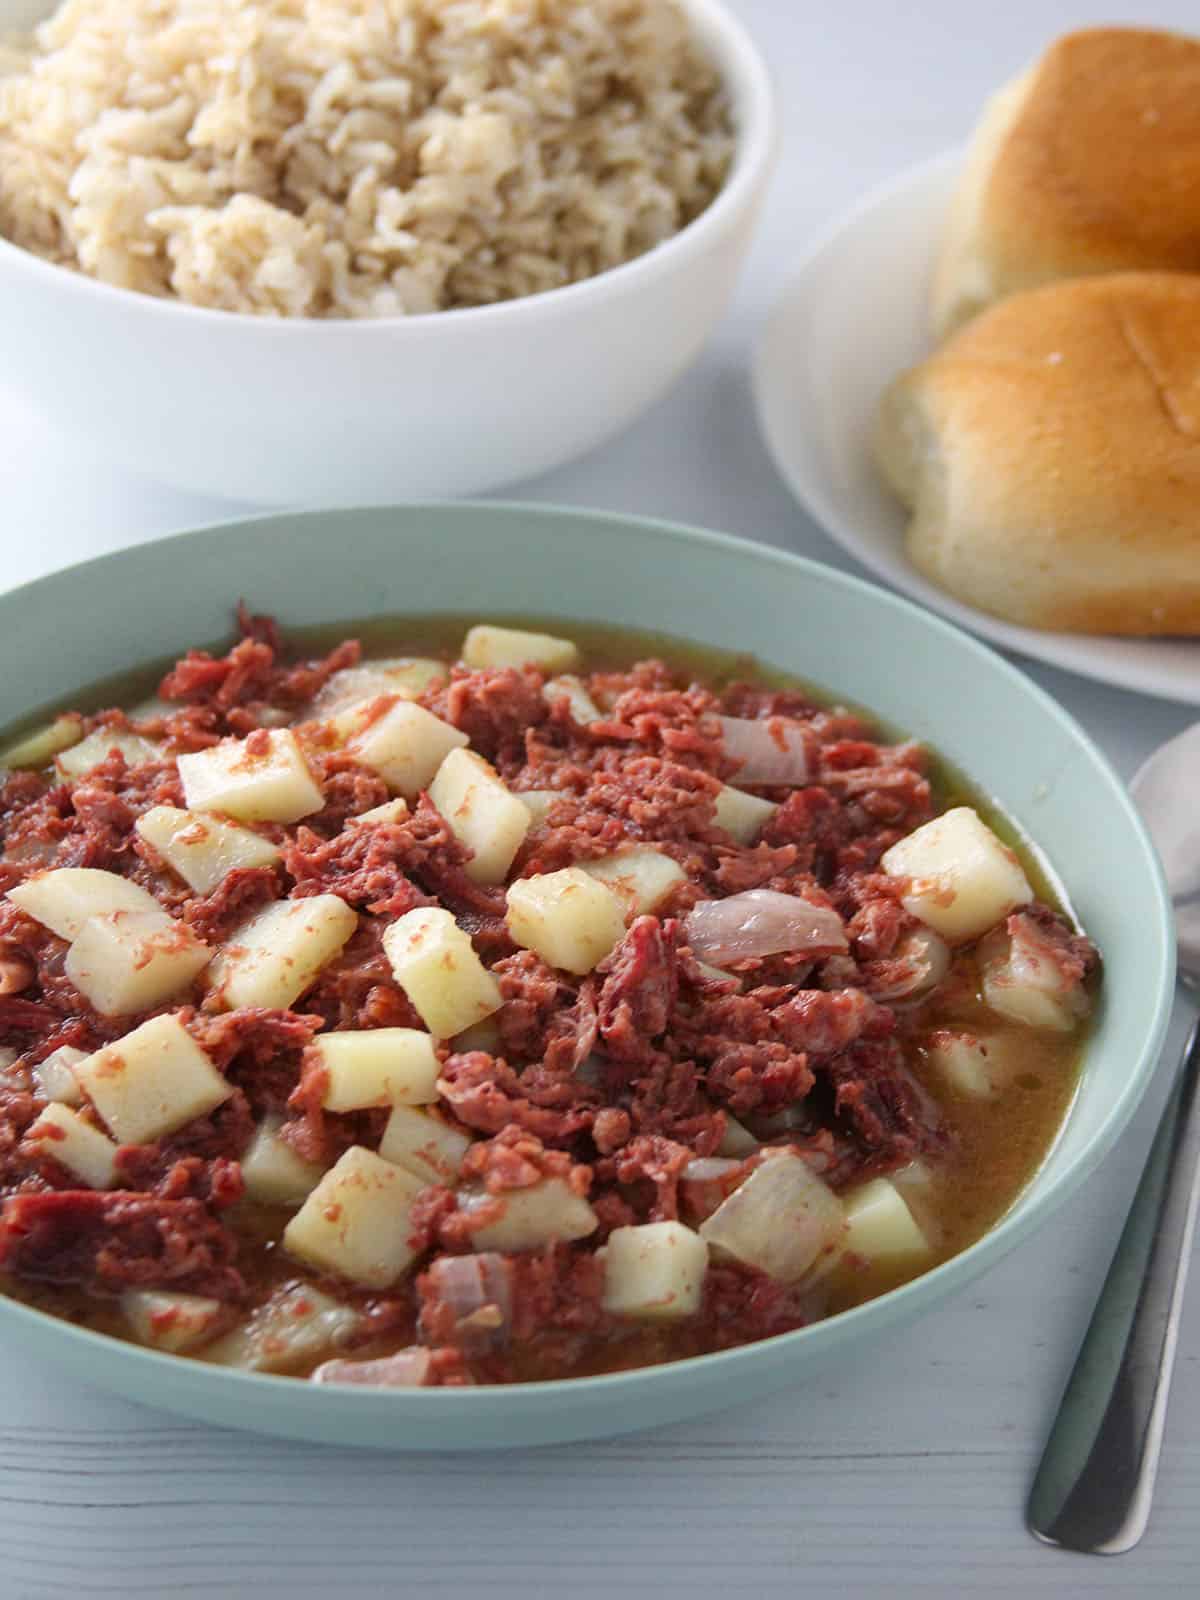 Ginisang Corned Beef in a serving bowl with pandesal and steamed rice on the side